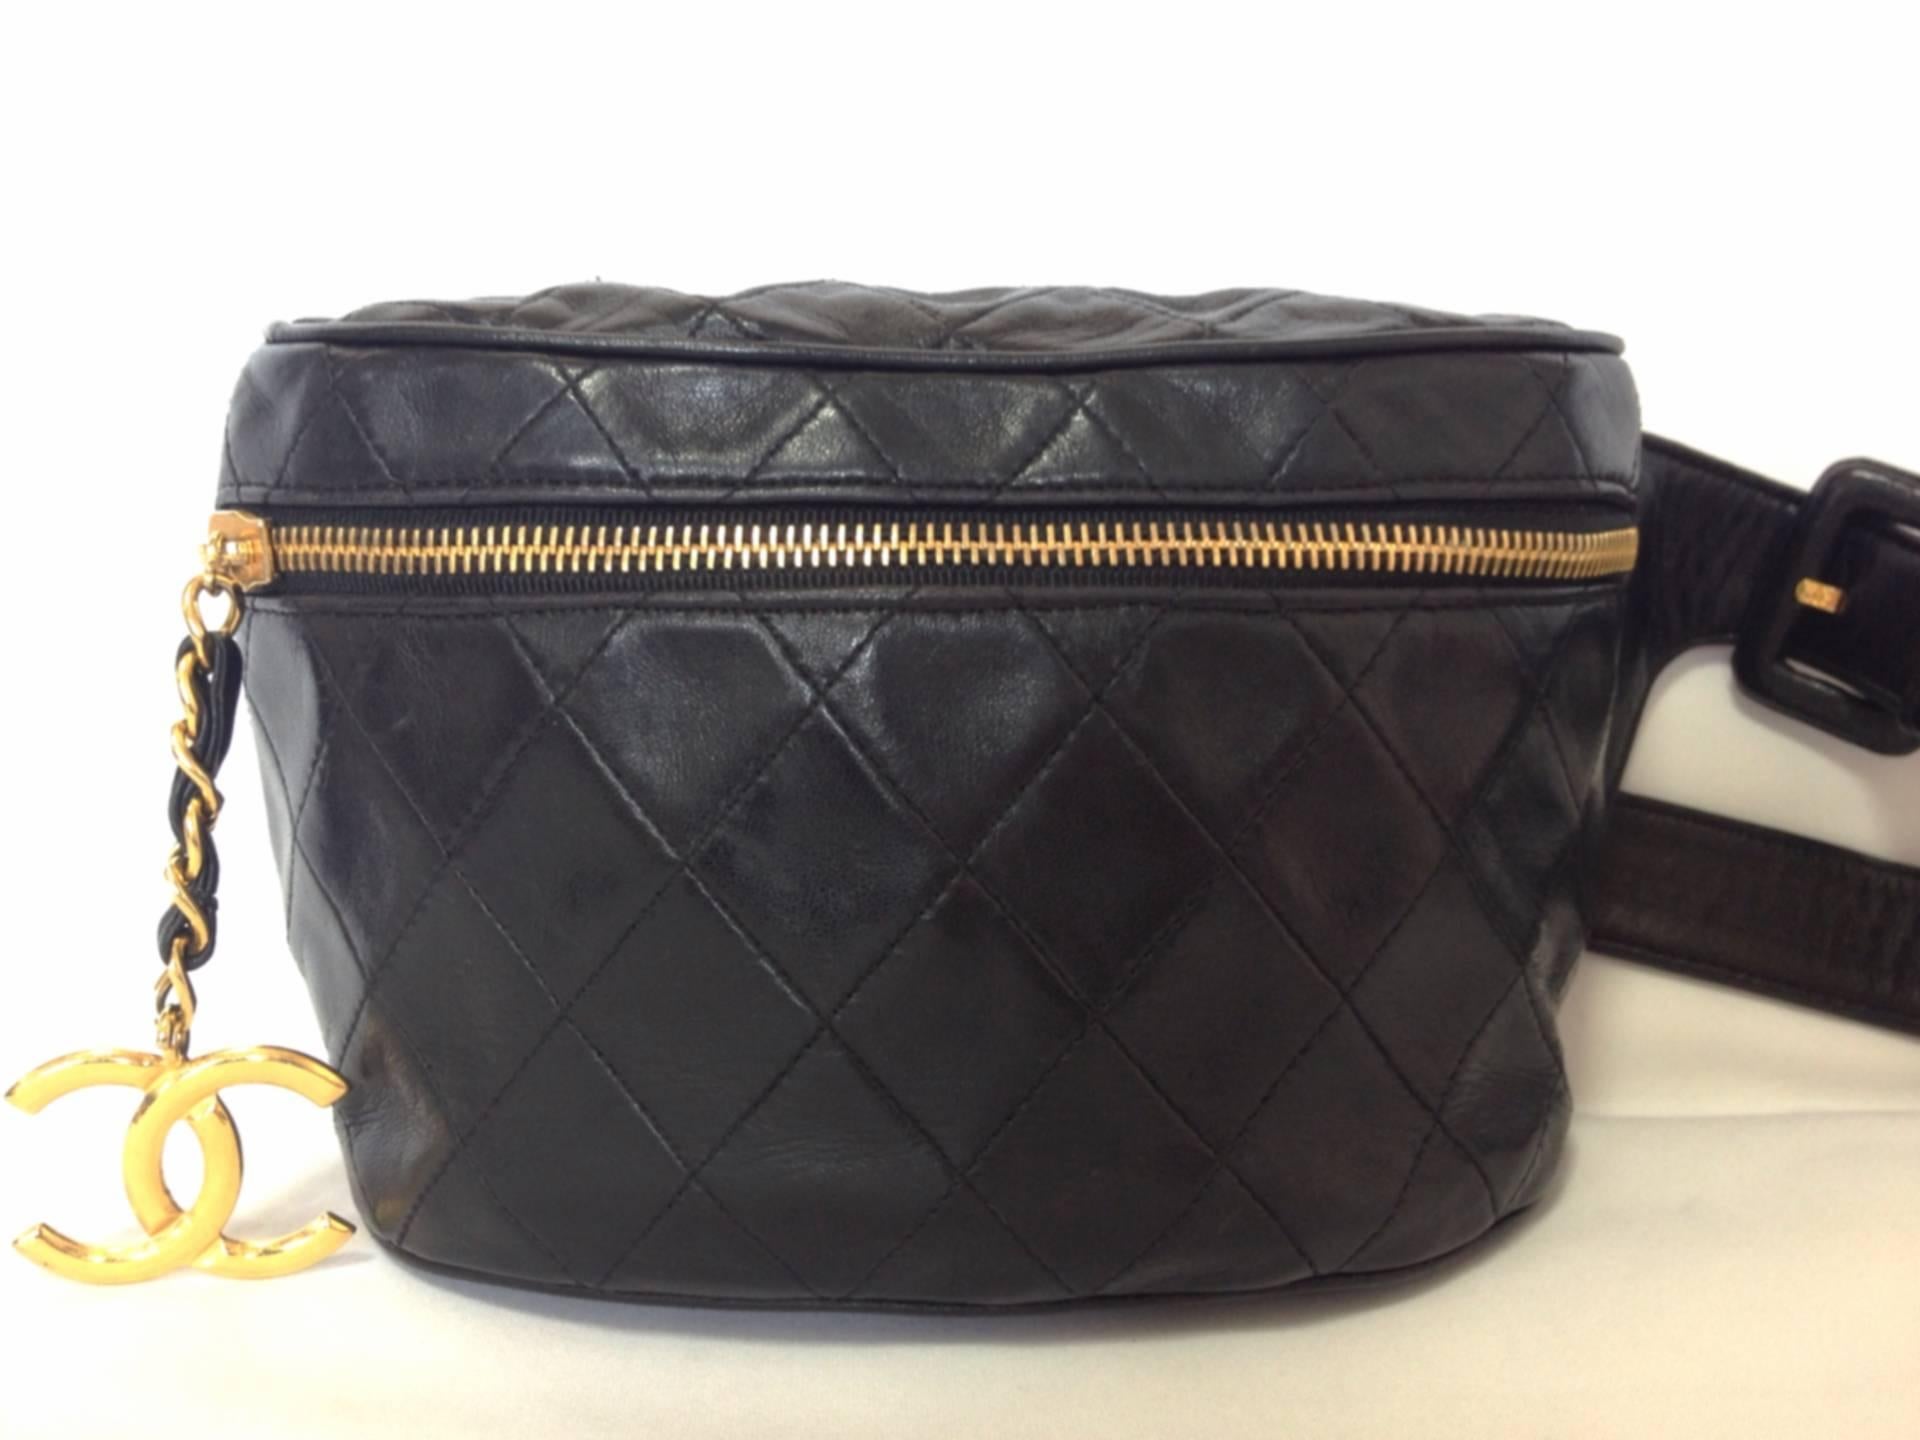 Vintage CHANEL black leather waist bag, fanny pack with a detachable belt and large CC charm. Classic purse for waist size 31